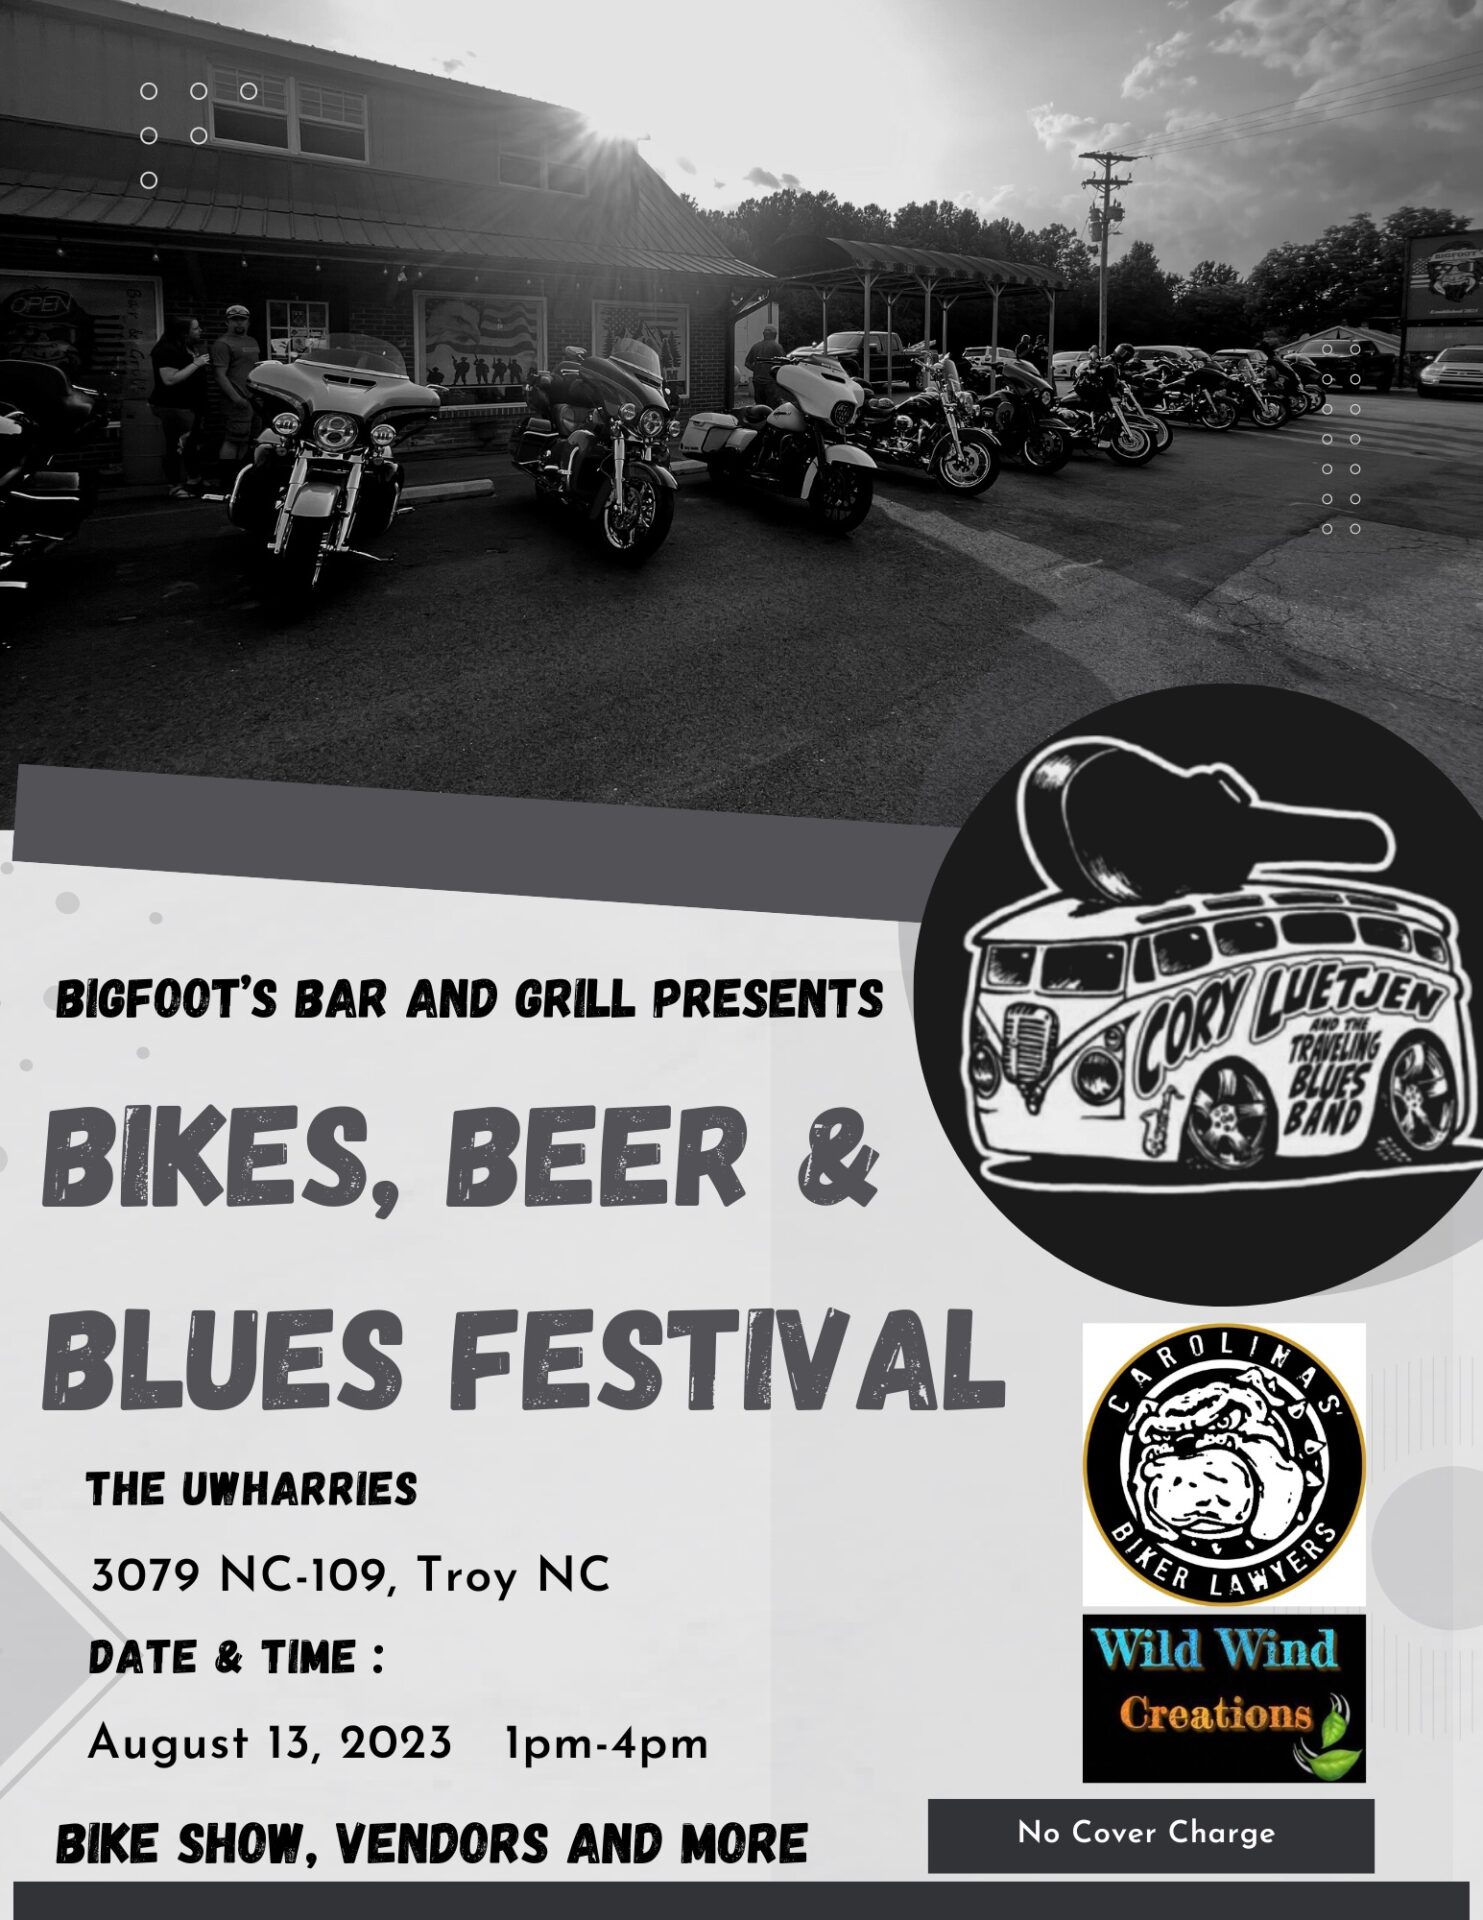 Bikes, Beer and Blues Festival at Bigfoots